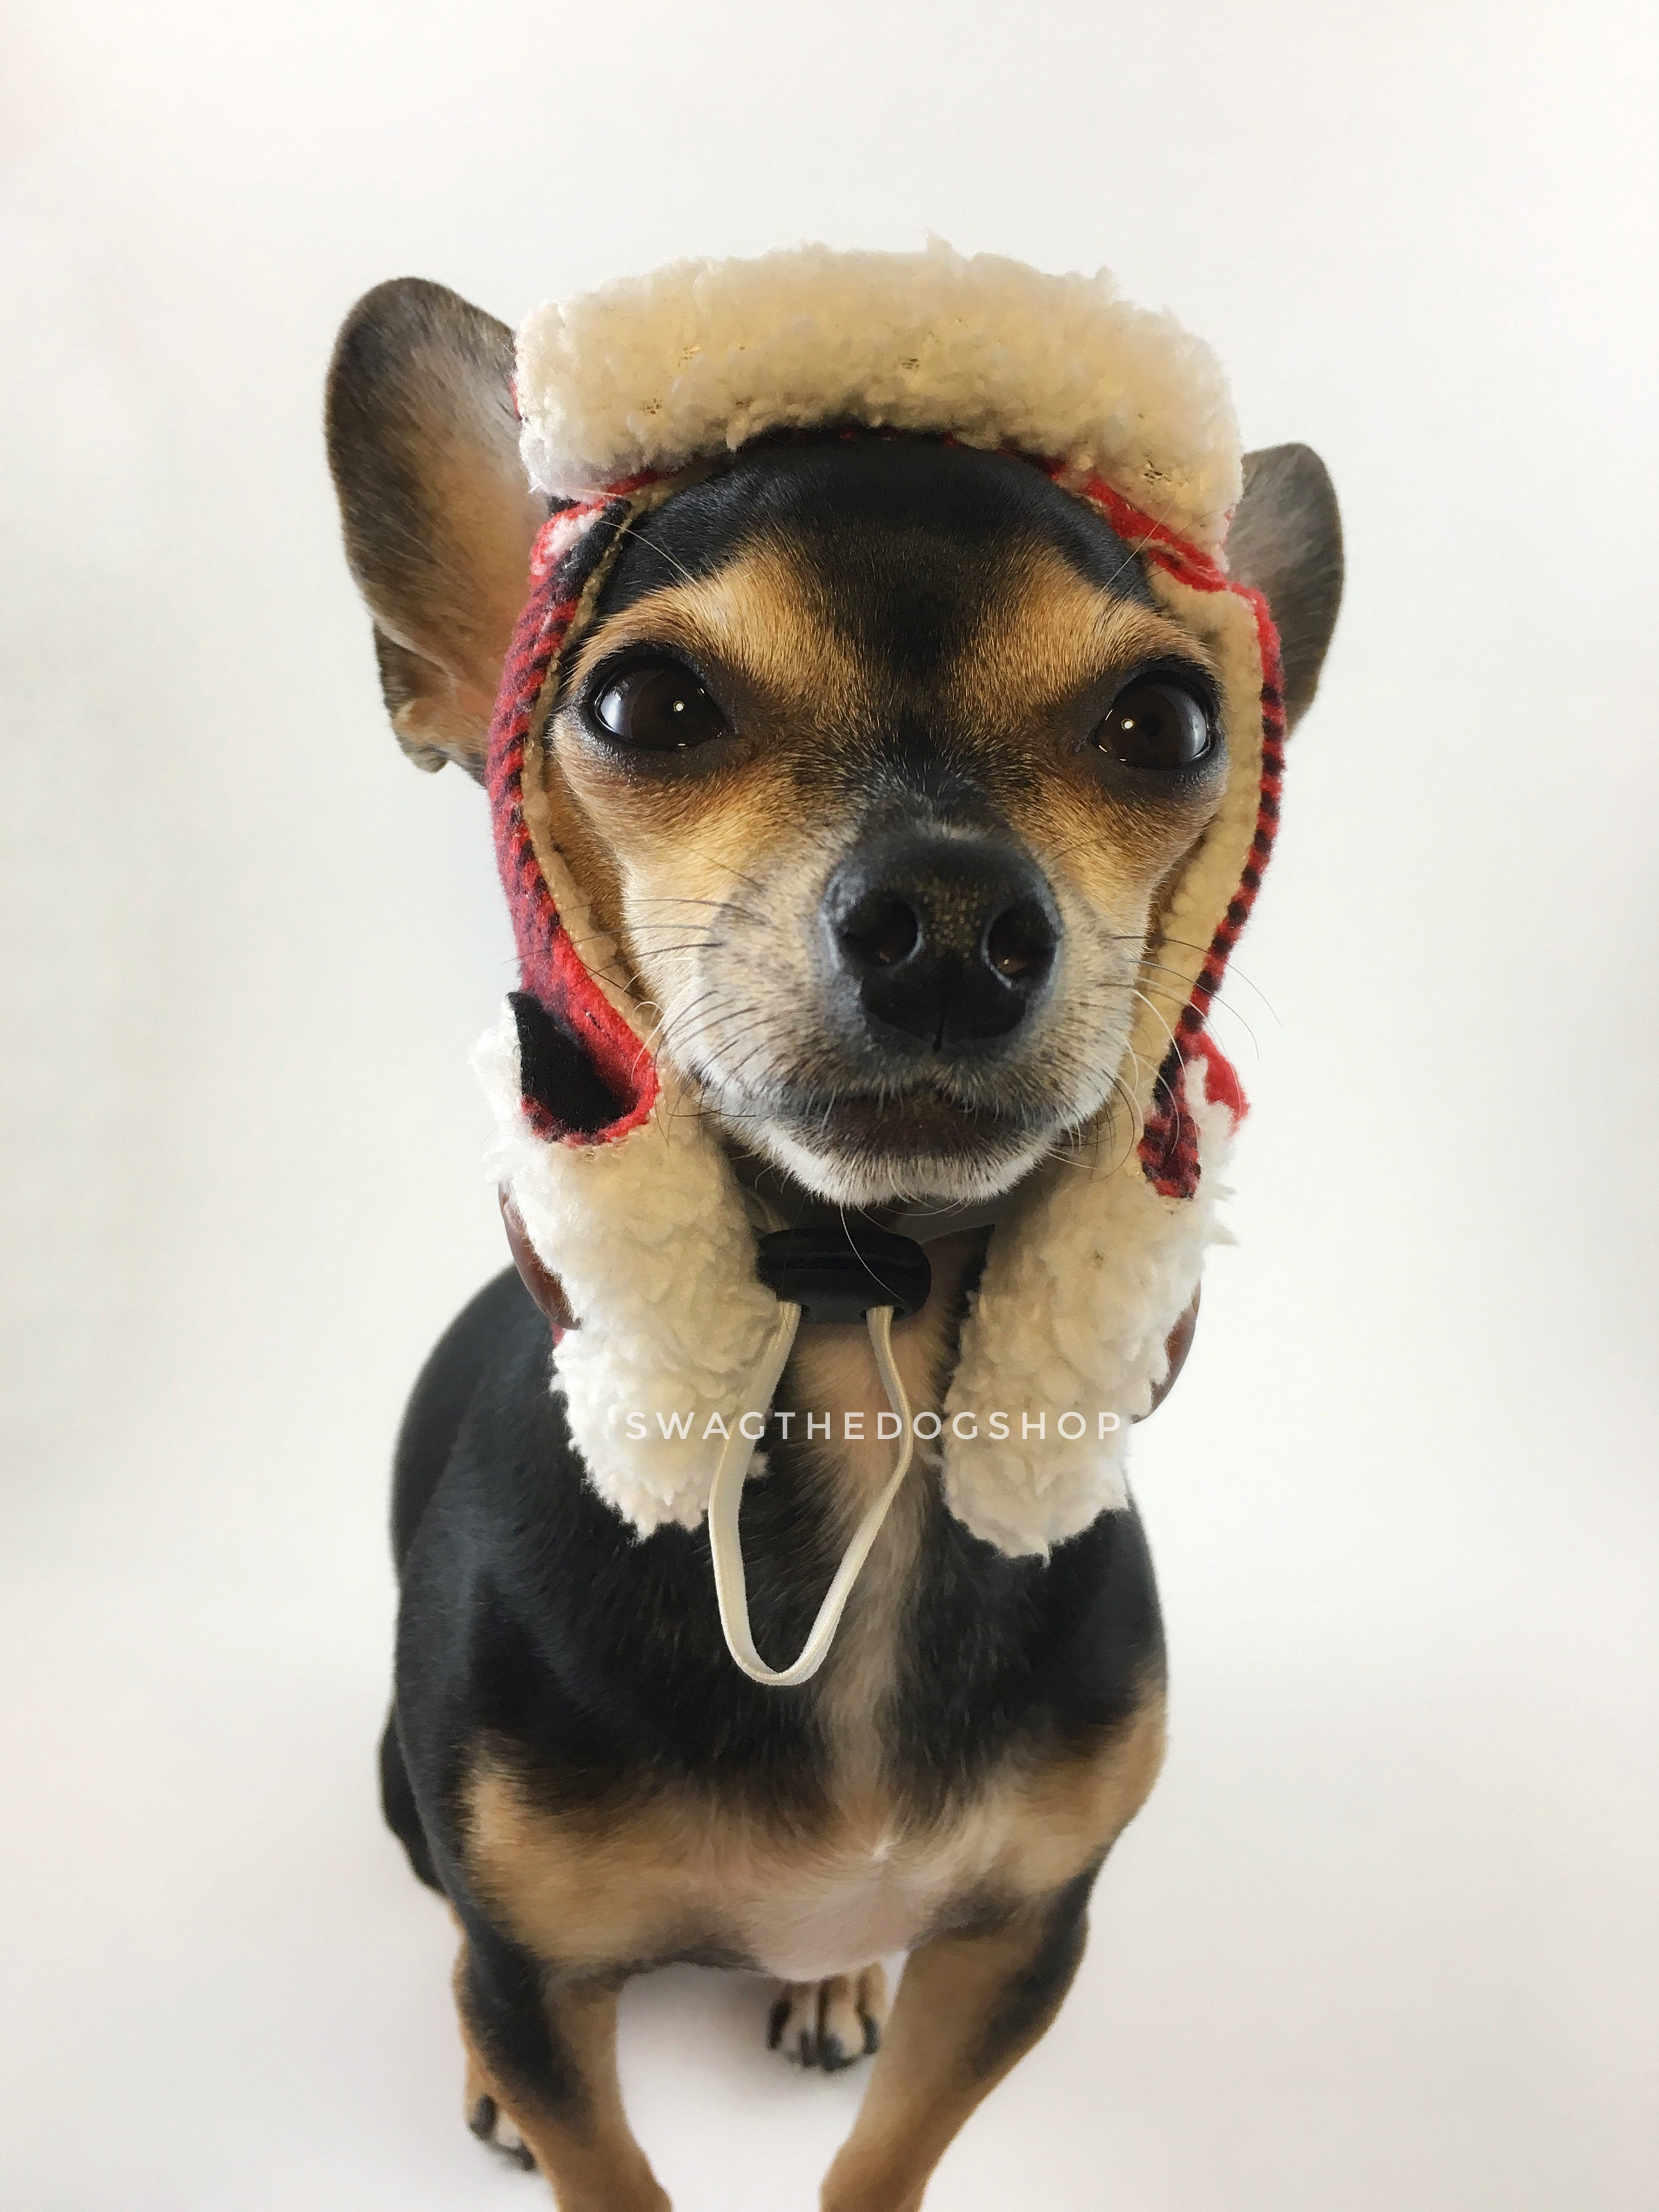 True North Aviator Hat. Front view of Hugo, black and tan Chihuahua wearing the hat. Hand-made with red plaid fleece fabric with sherpa inside, a hole for each ears, side flap with buttons on and a drawstring under the chin to adjust. The front bill is flipped back to show the sherpa fabric.